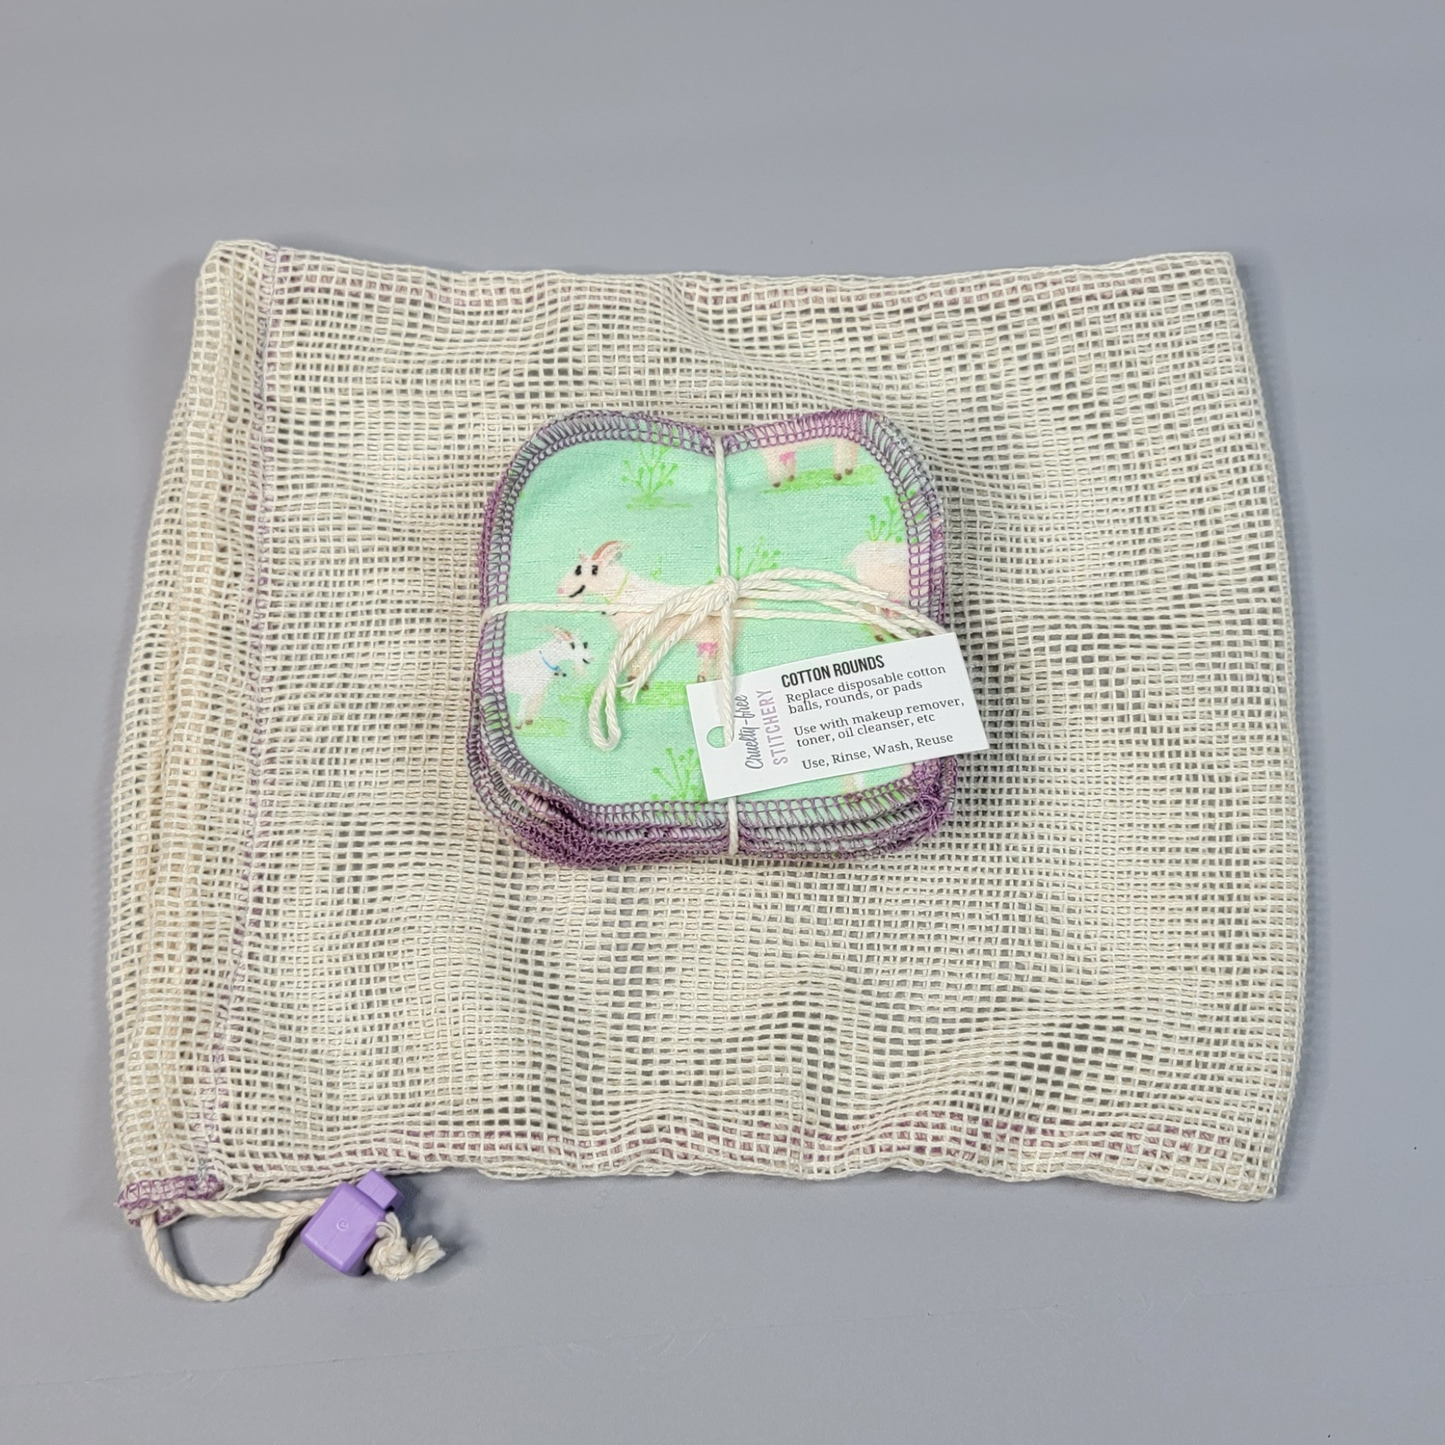 A bundled pack of cotton rounds on top of a mesh drawstring bag. The mesh is a natural off-white color with square holes, and a light purple cord stop.